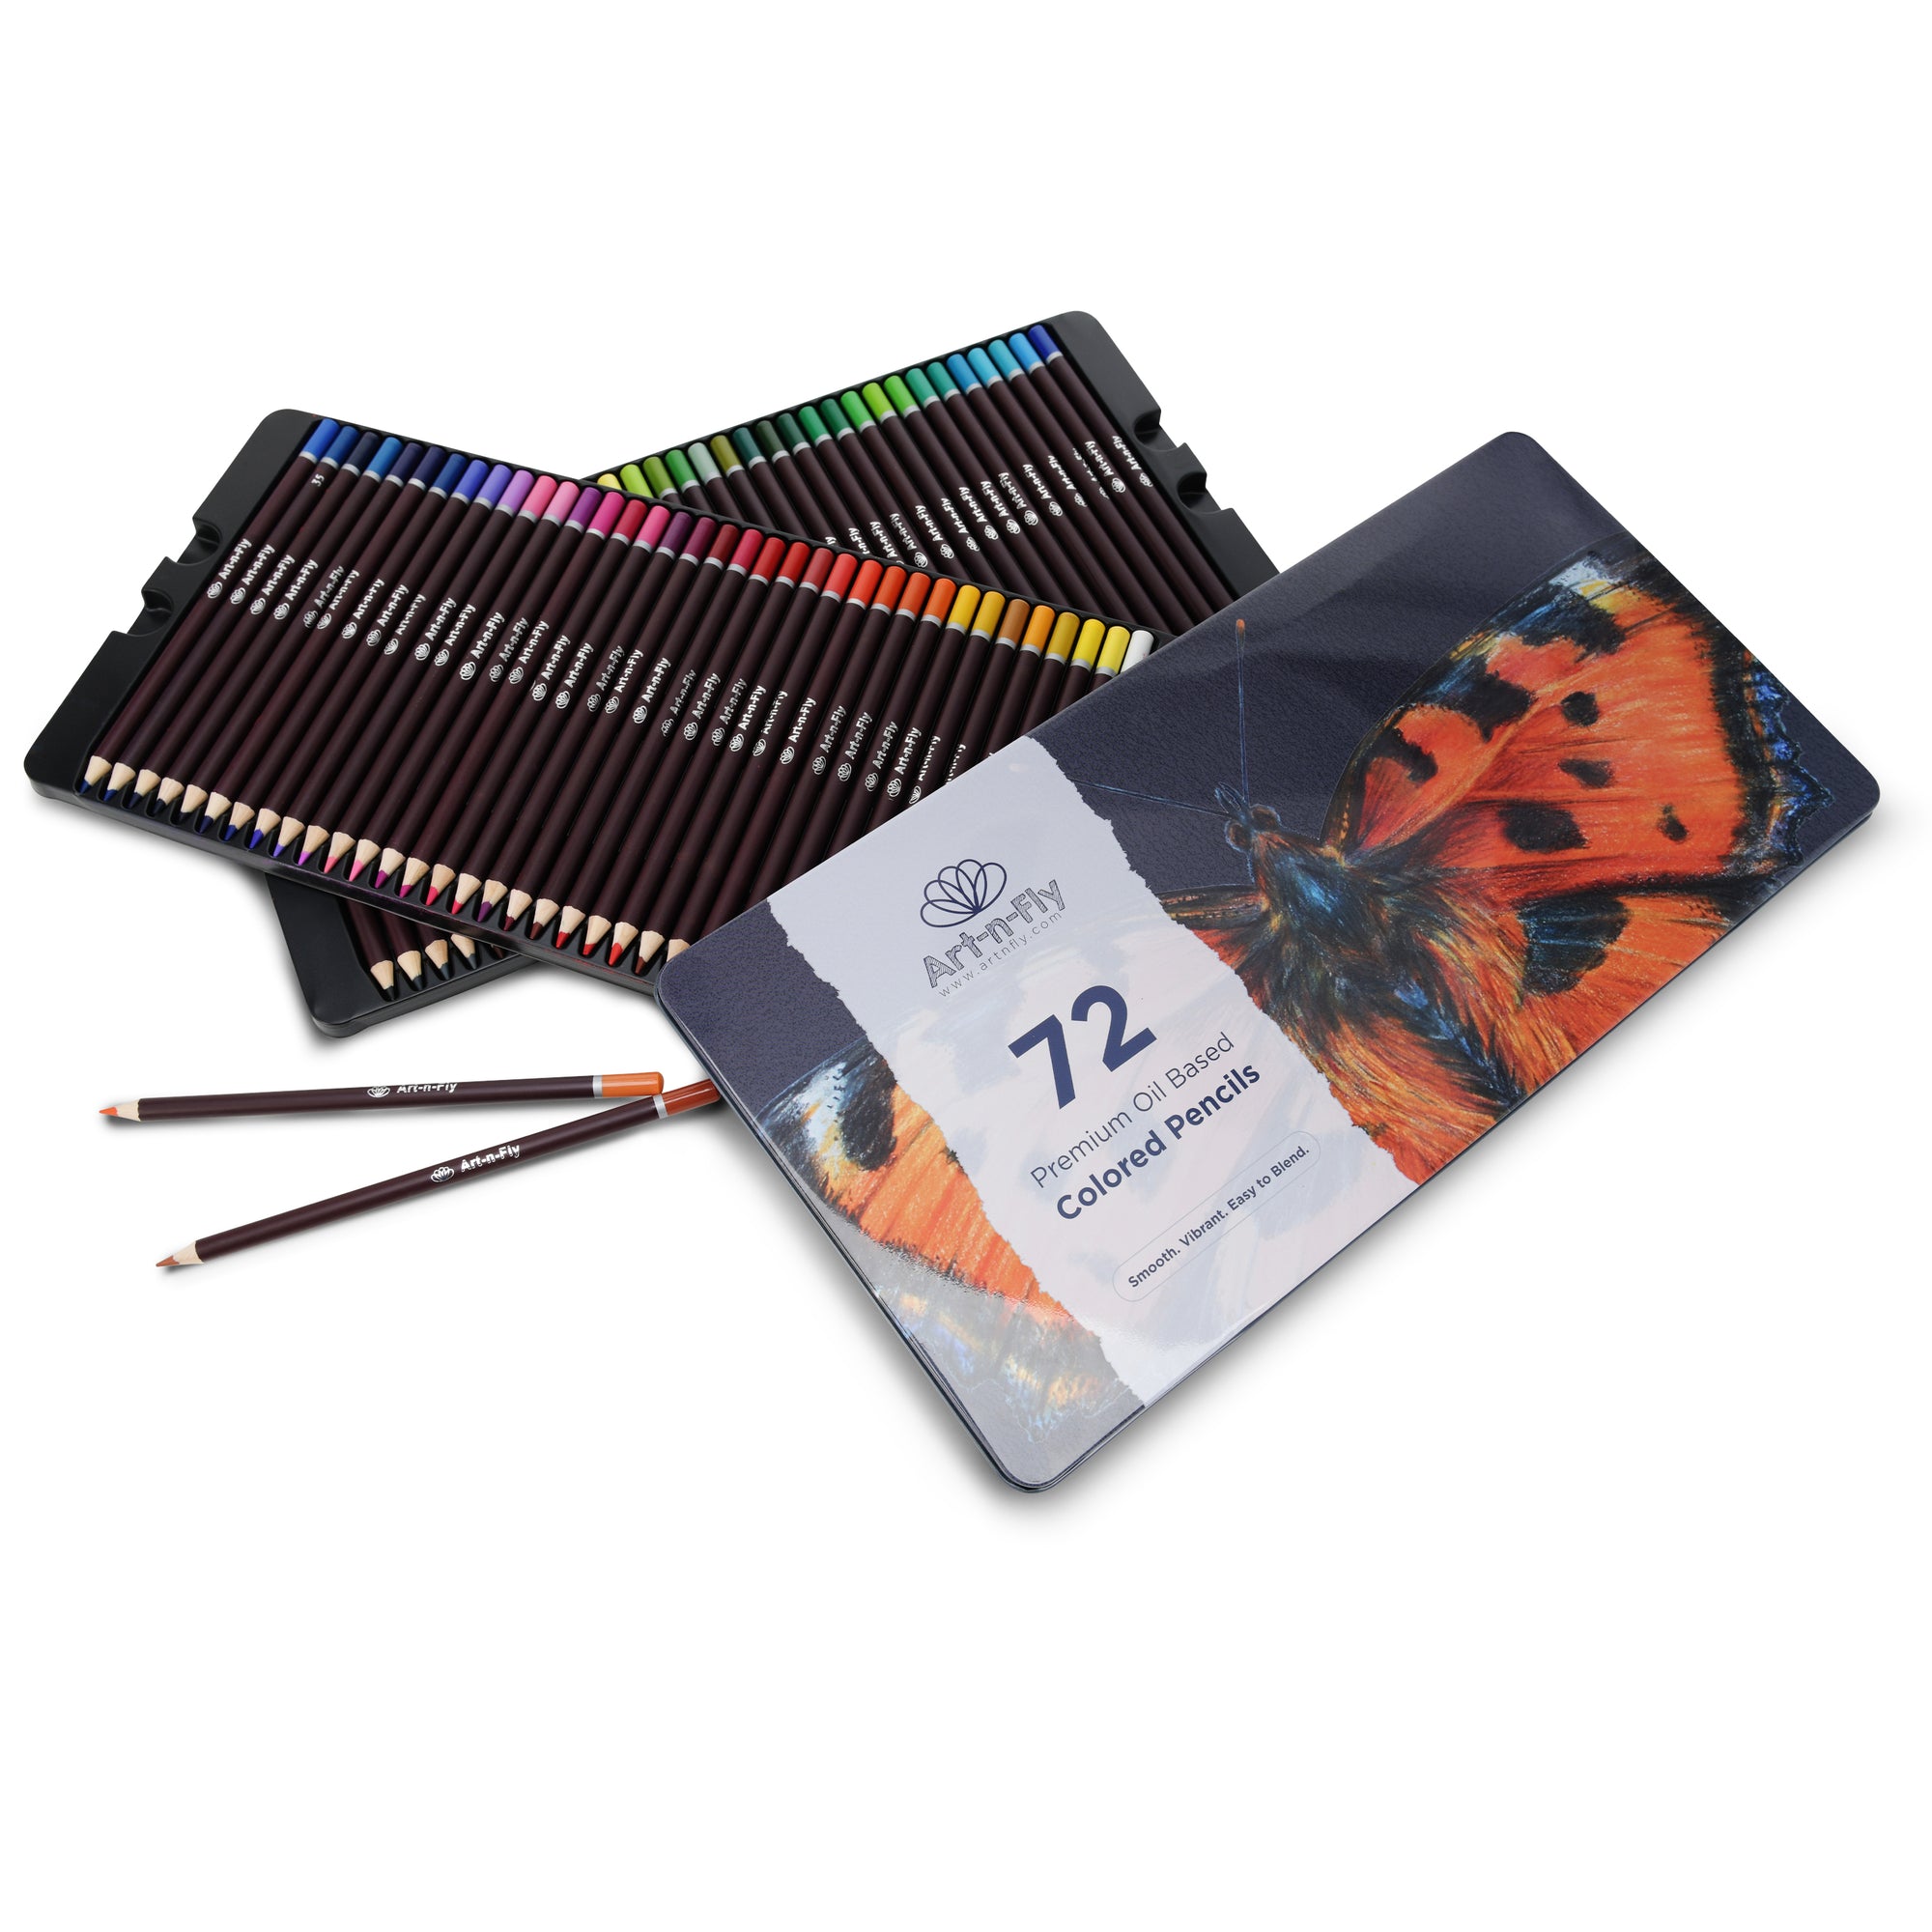 72 Colored Pencils Oil-Based Set, Professional Drawing Pencils for